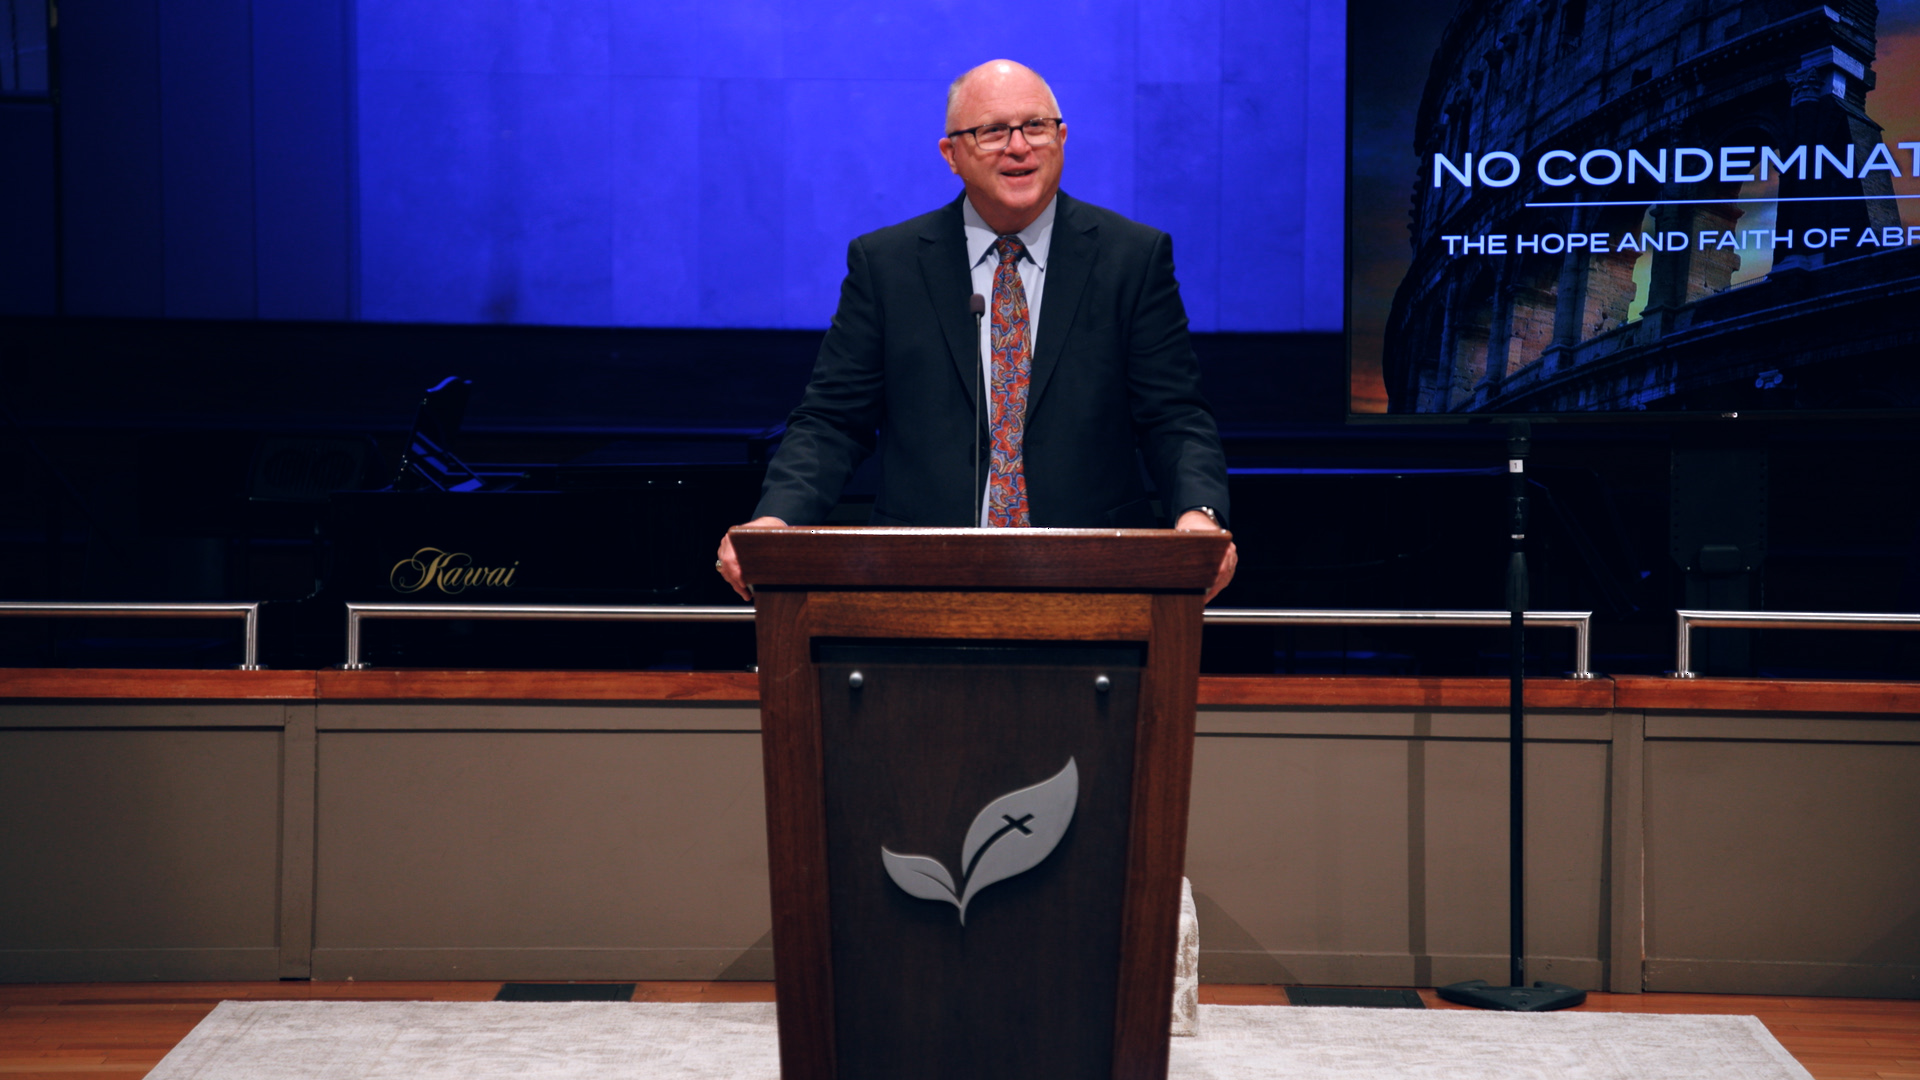 Pastor Paul Chappell: The Hope and Faith of Abraham